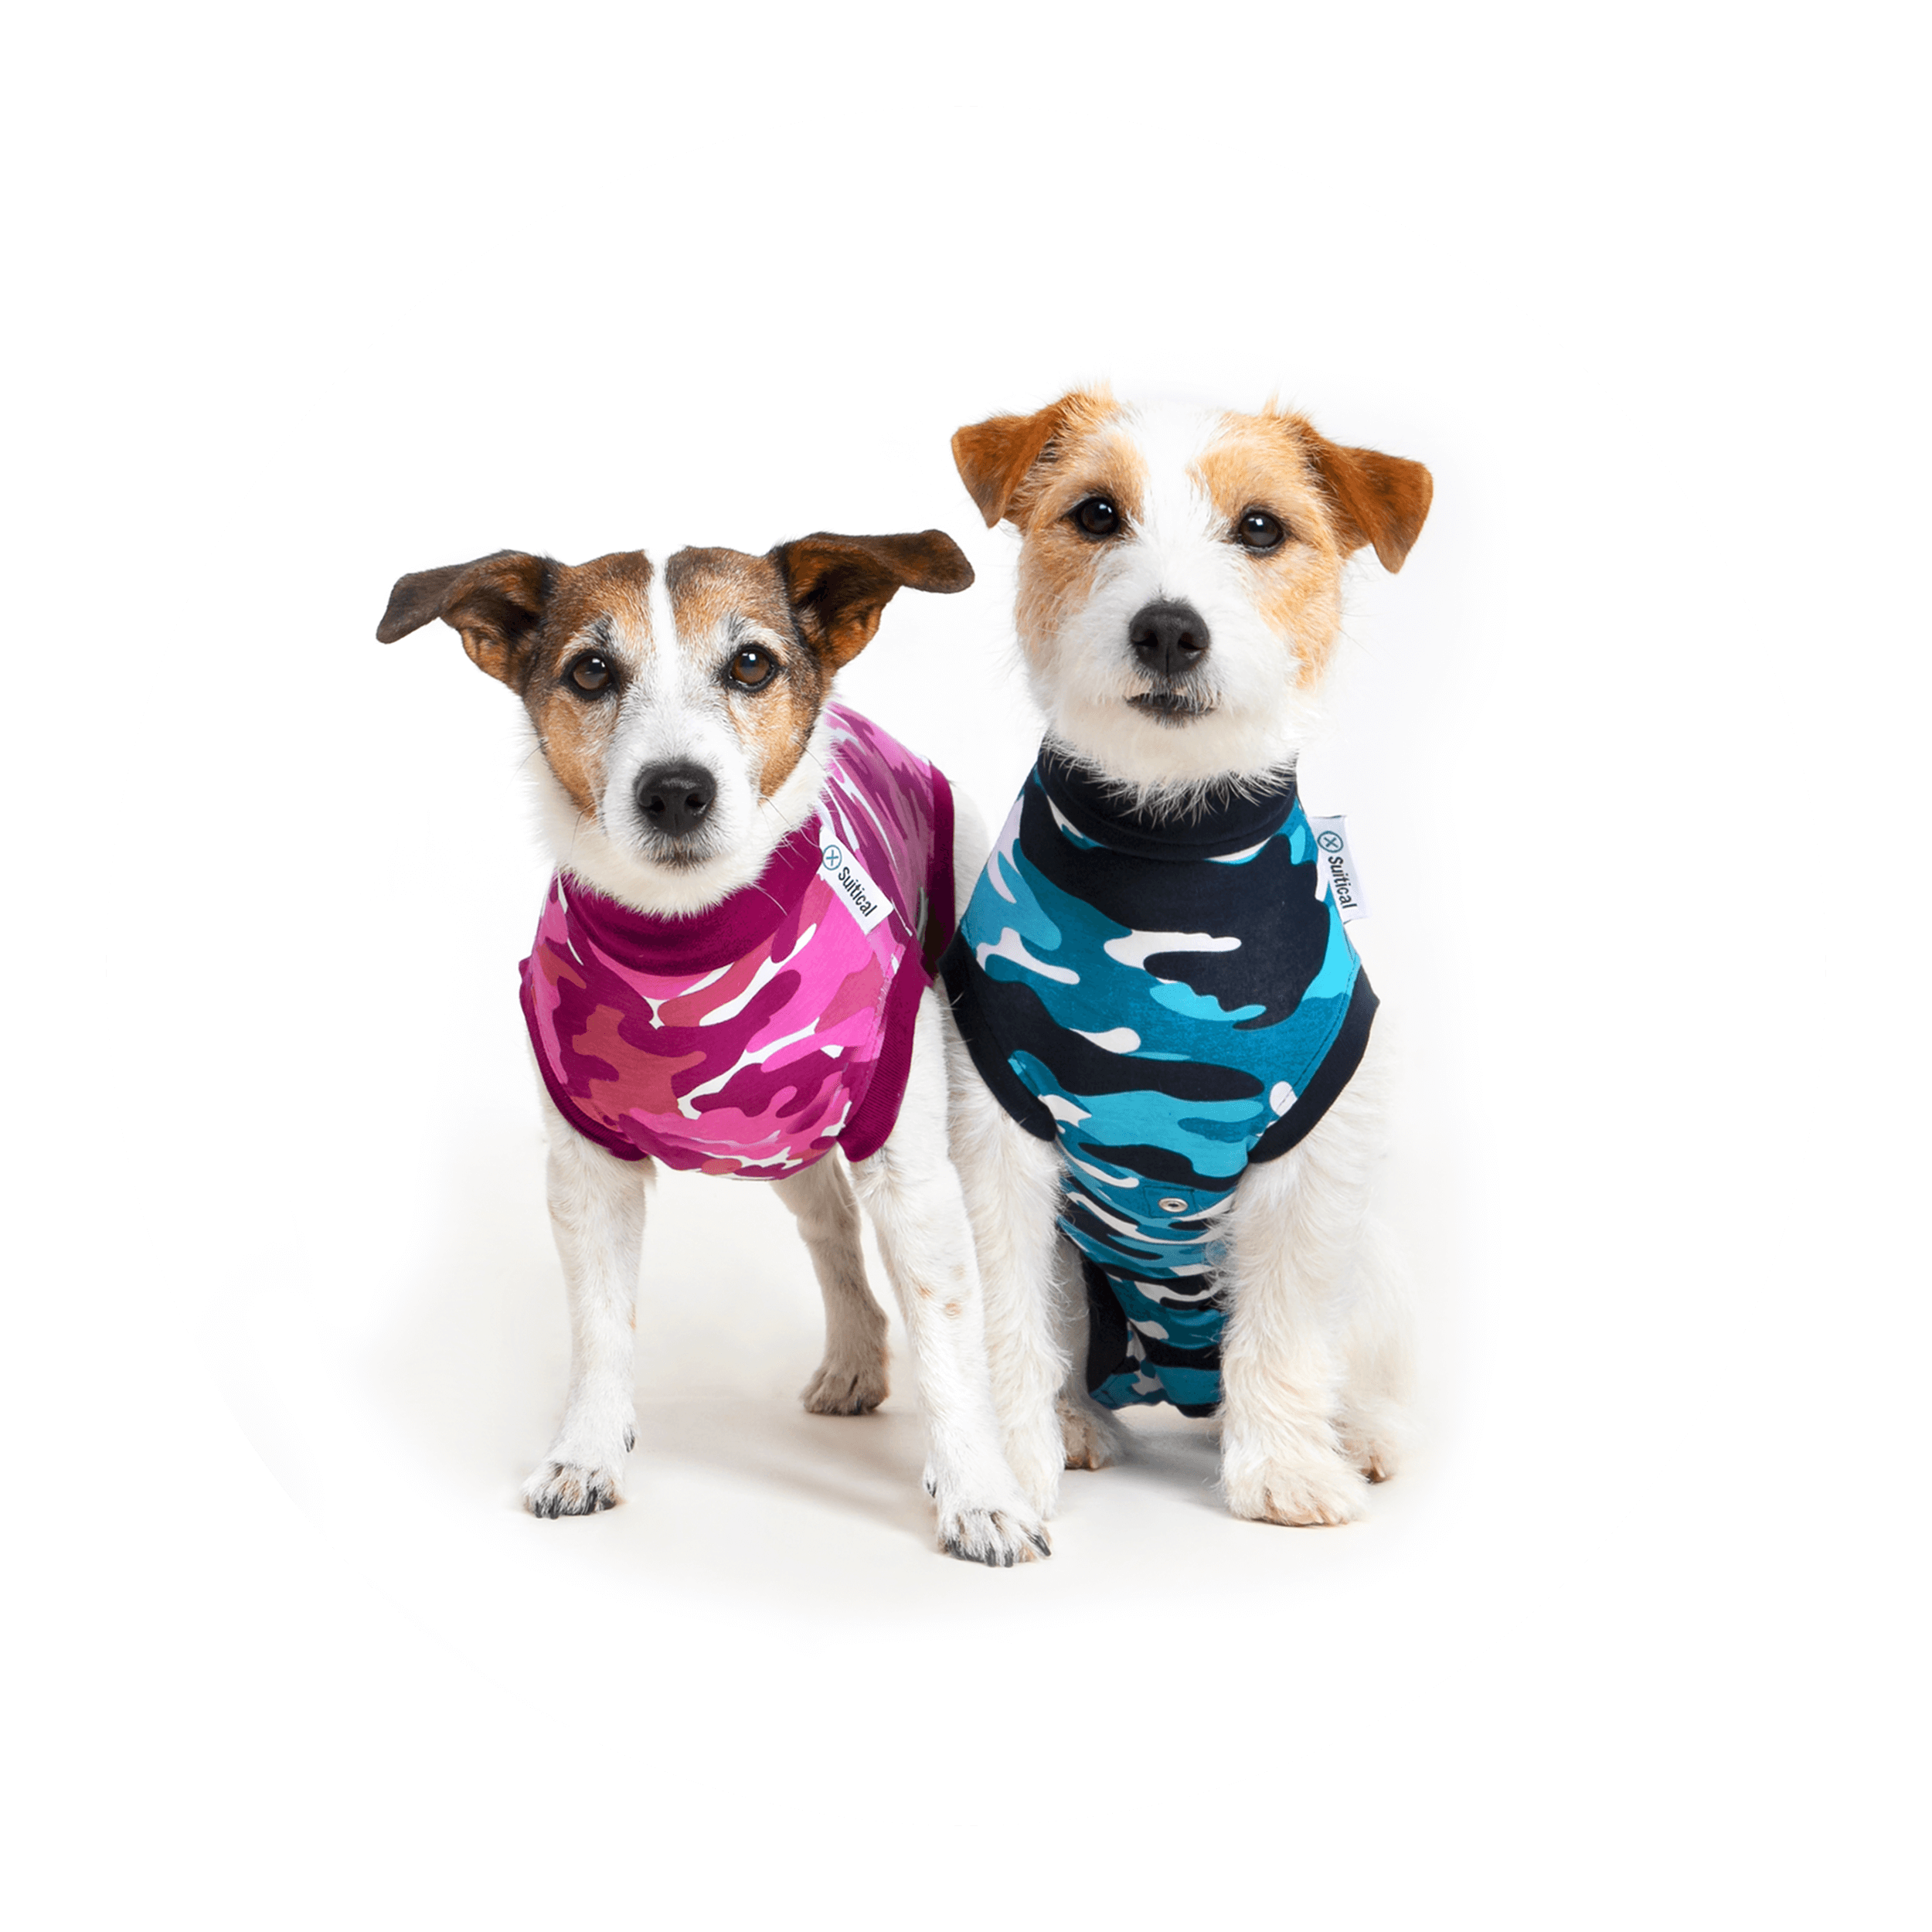 Small Dog Clothes Pet Dog Pajamas 4 Legged Puppy Jumpsuit Surgical Recovery Suit Abdominal Wounds Protector Soft Cotton Breathable Comfortable for Small Dog Puppy Boys Blue, XS 